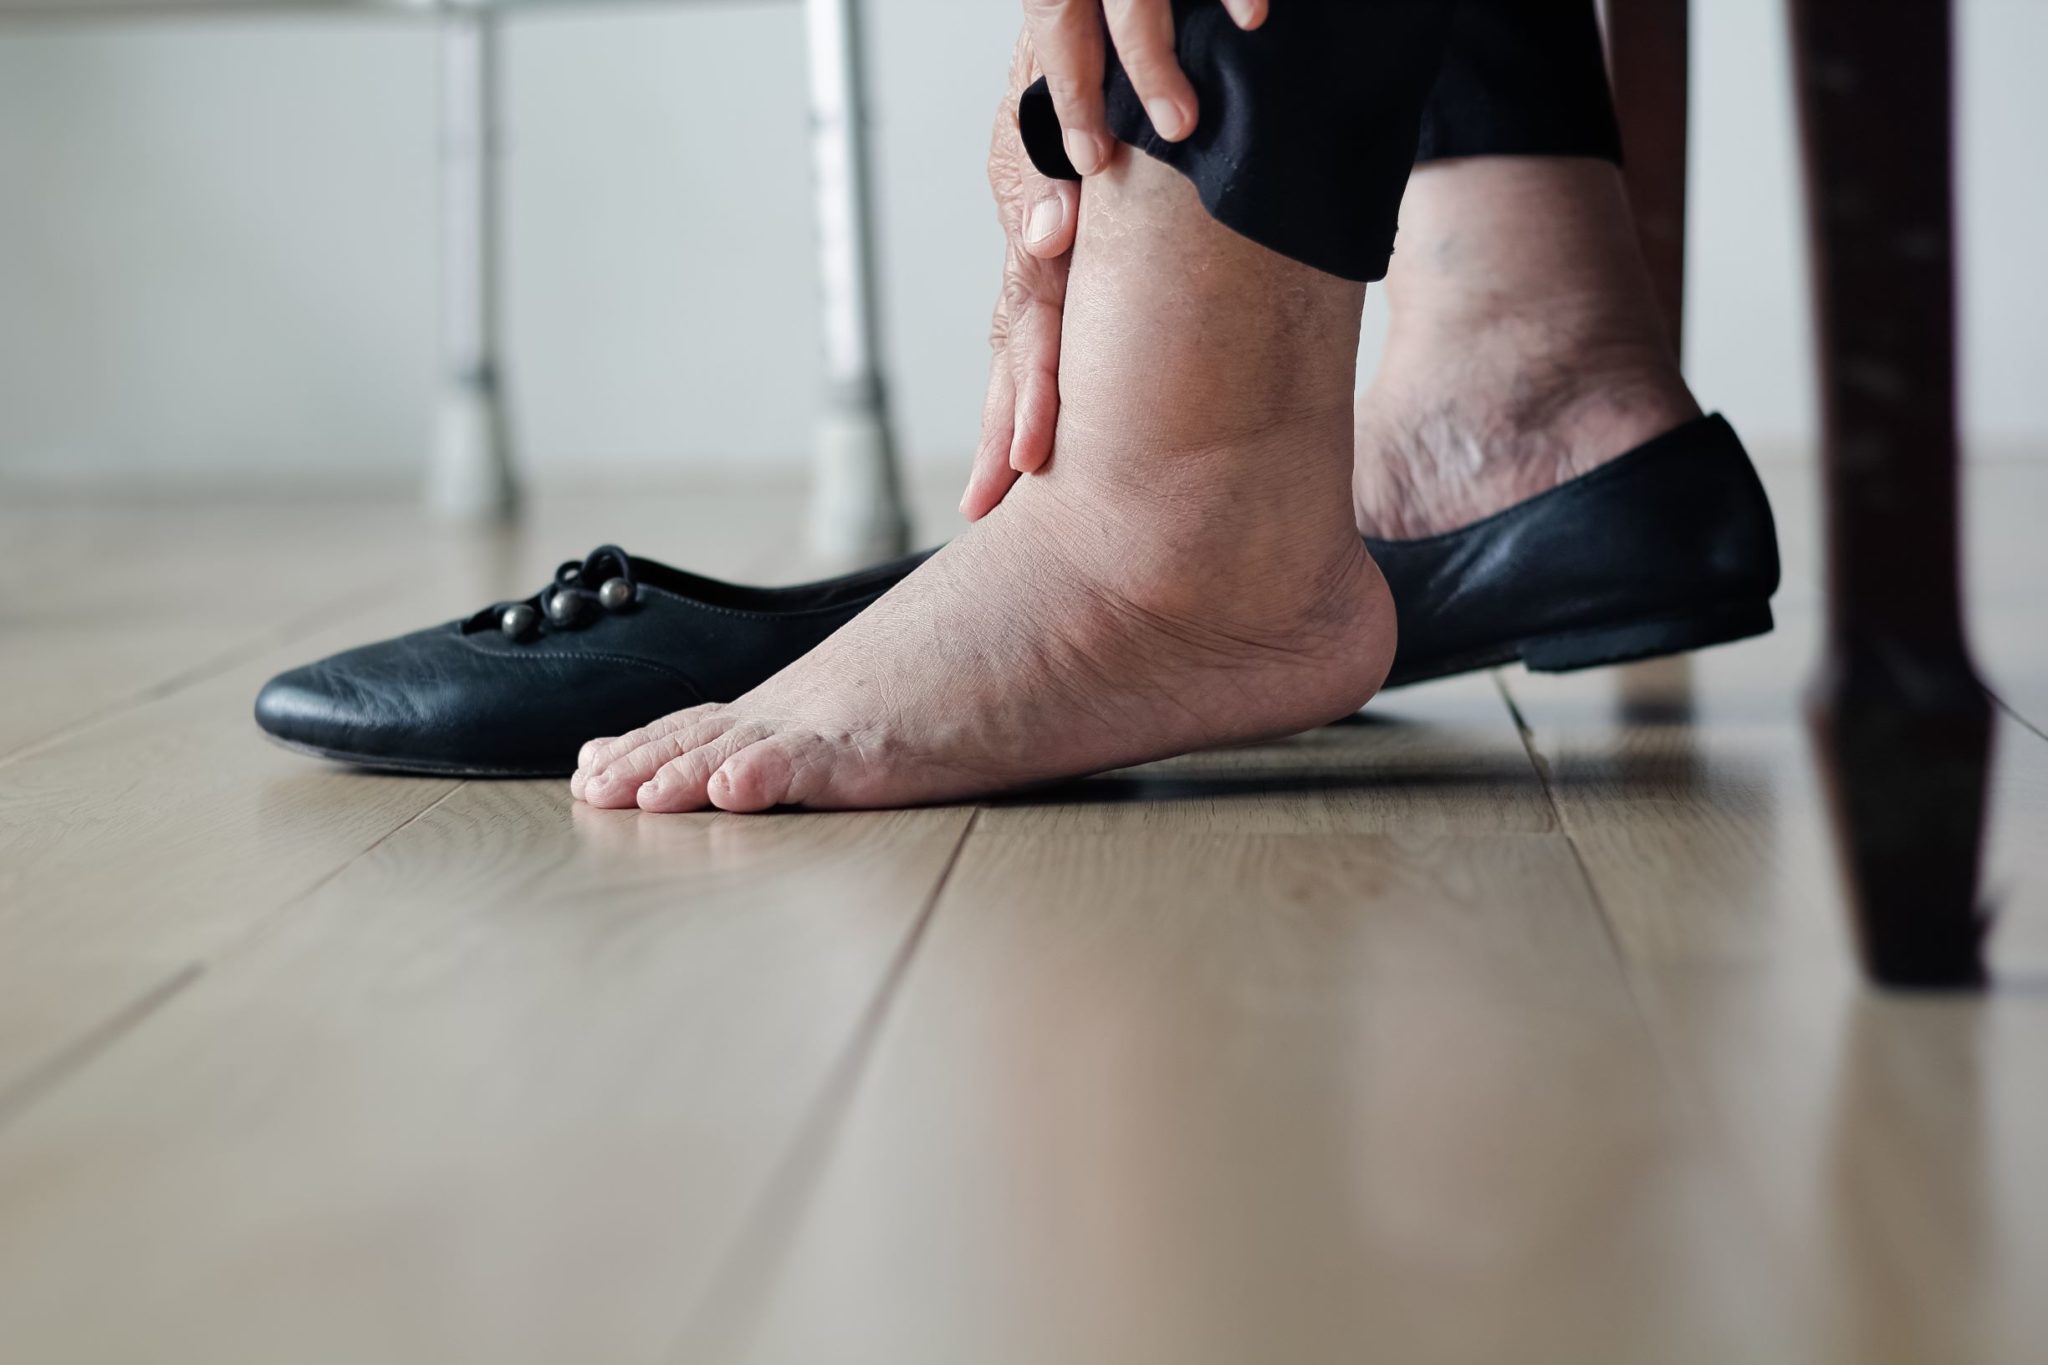 Swollen ankles - sign of heart problems